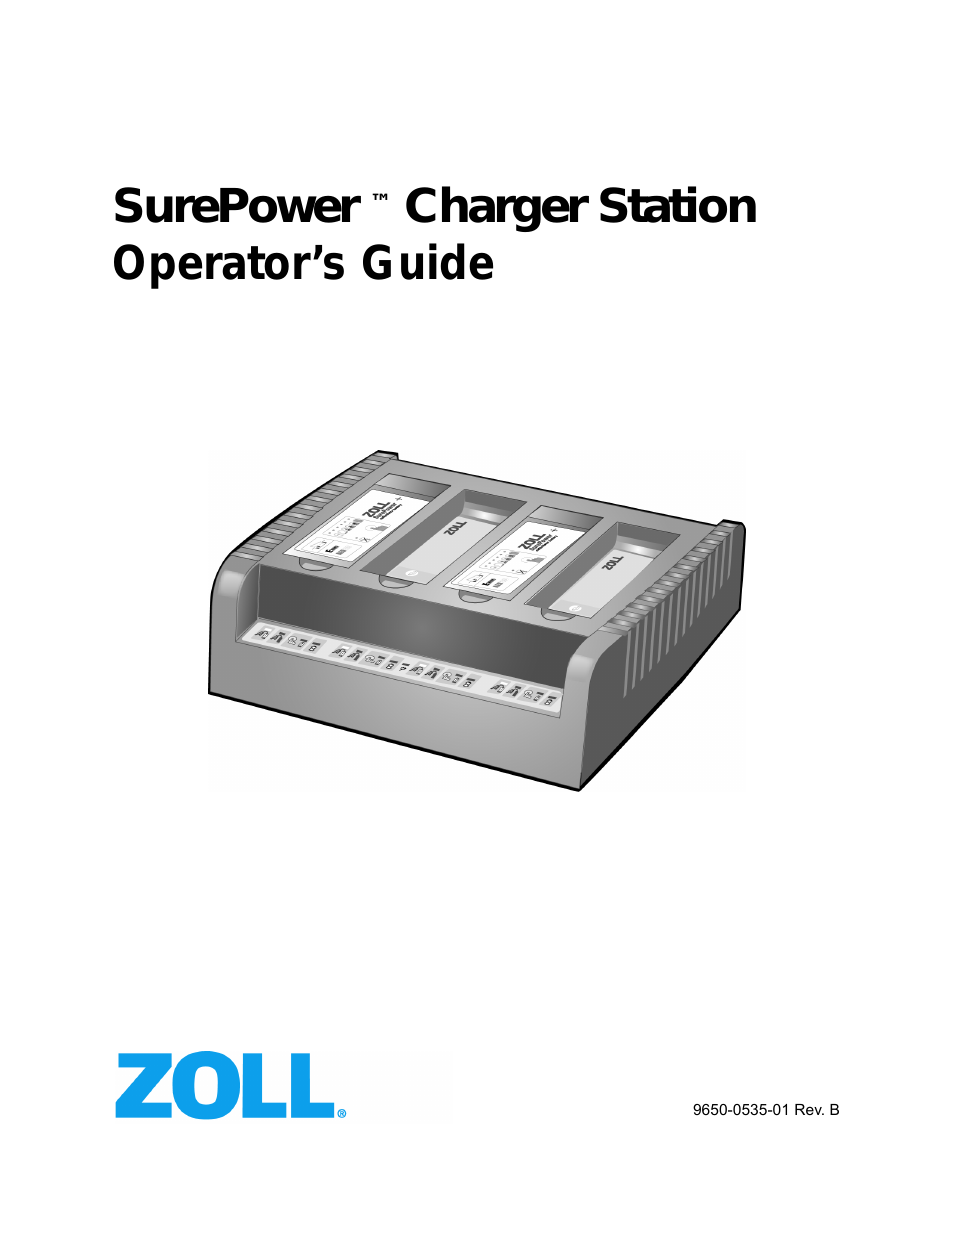 SurePower Rev B Charger Station